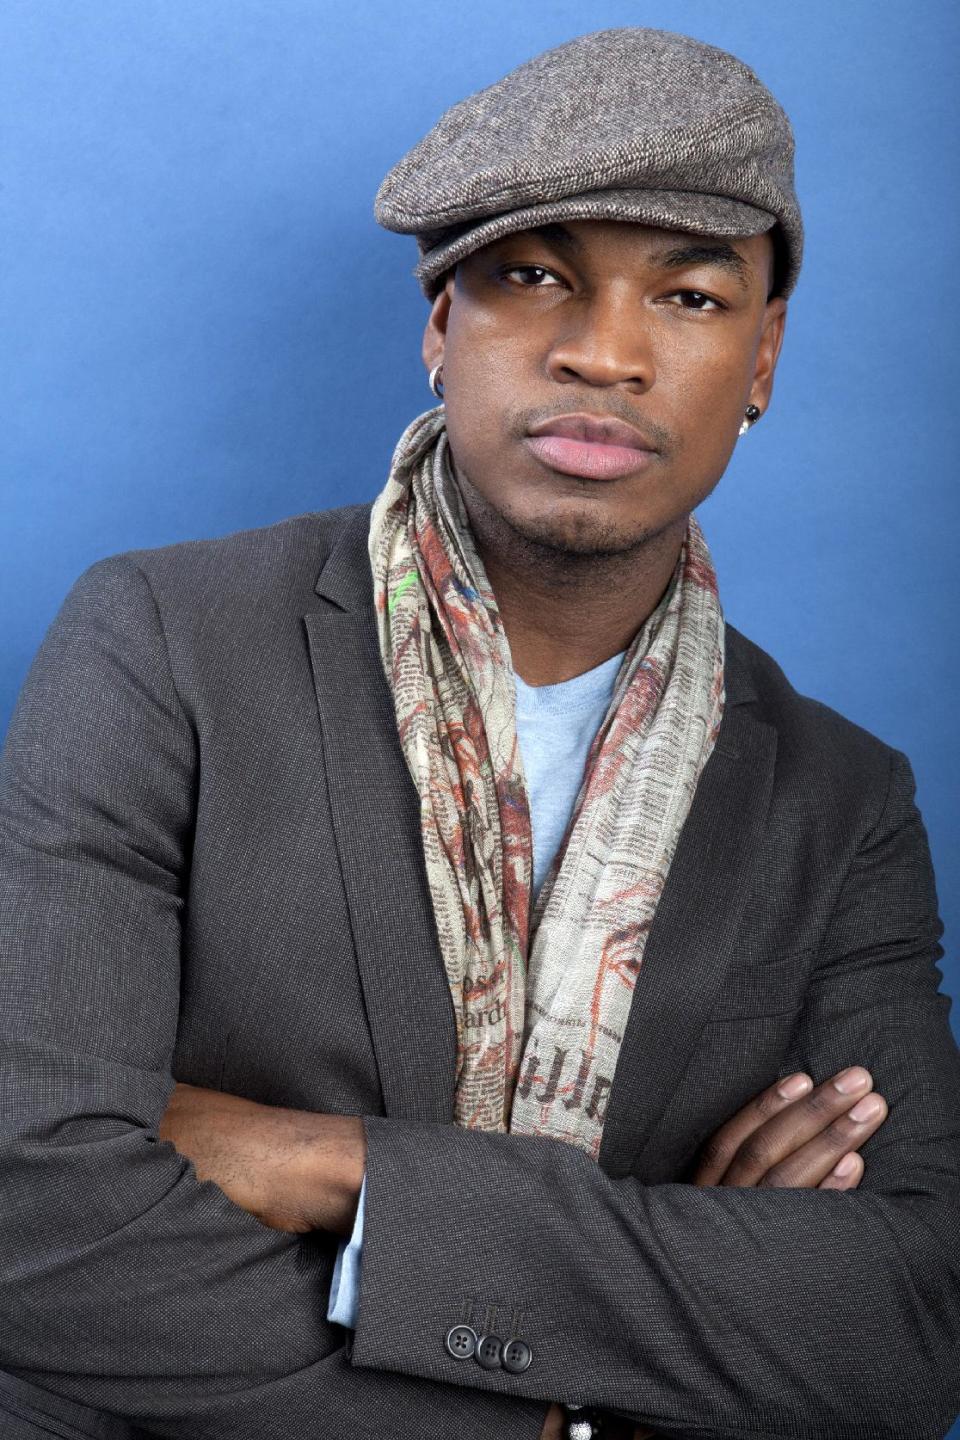 This Oct. 12, 2012 photo shows R&B singer-songwriter and music executive Ne-Yo, born Shaffer Chimere Smith, in New York. Ne-Yo is releasing his fifth album, “R.E.D.” It’s his first release on Universal Motown, where he also serves as senior vice president of A&R. (Photo by Amy Sussman/Invision/AP)